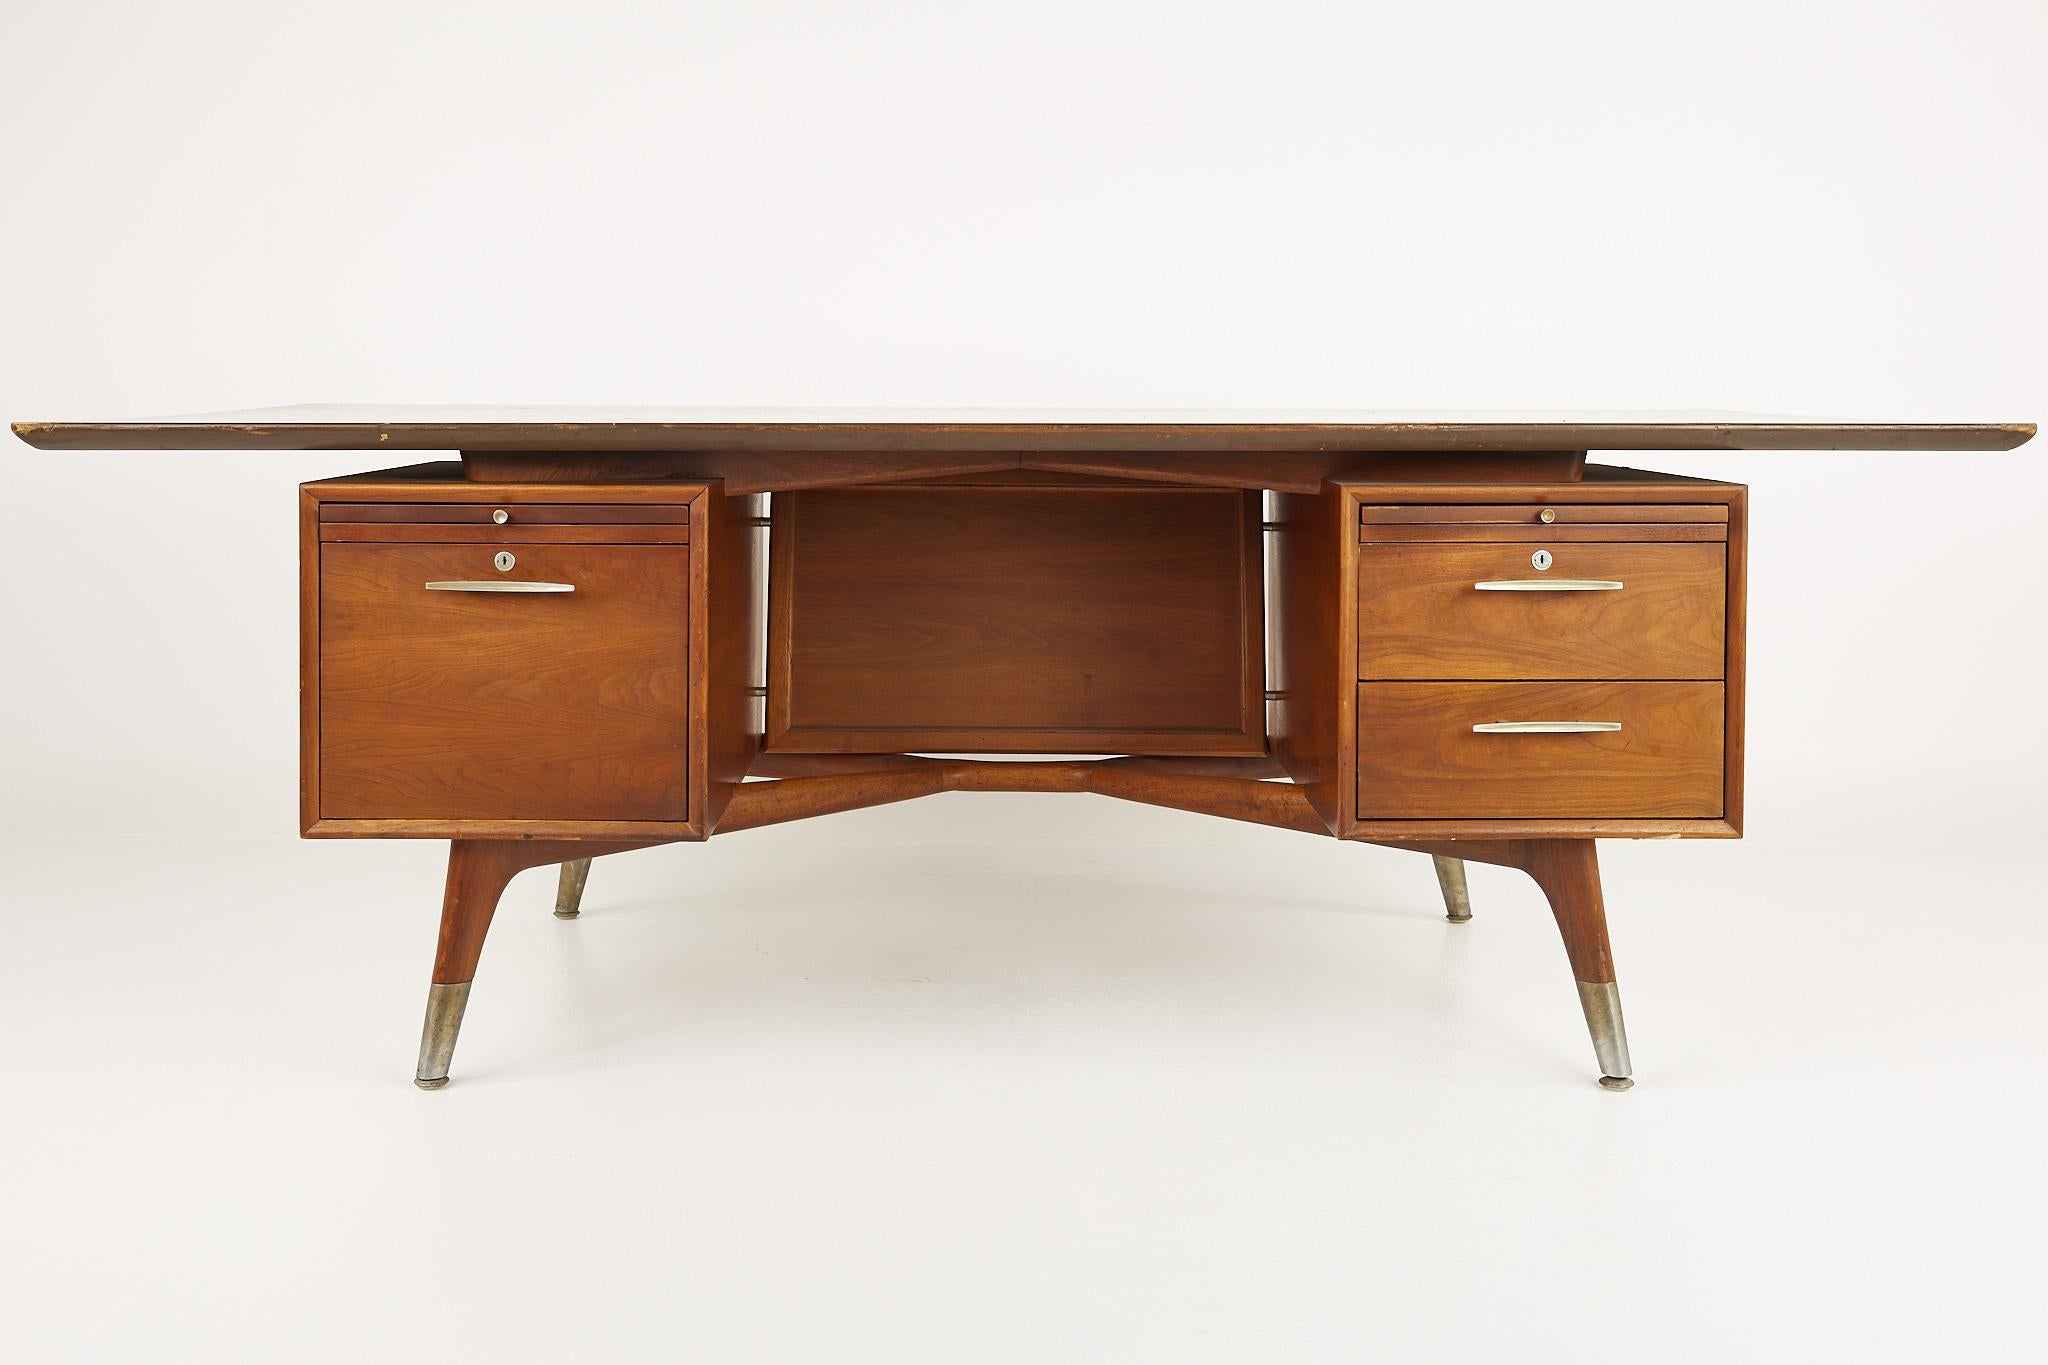 Standard Furniture Company mid century walnut brass and cane bowtie desk

Desk measures: 78 wide x 38 deep x 28.5 inches high

?All pieces of furniture can be had in what we call restored vintage condition. That means the piece is restored upon